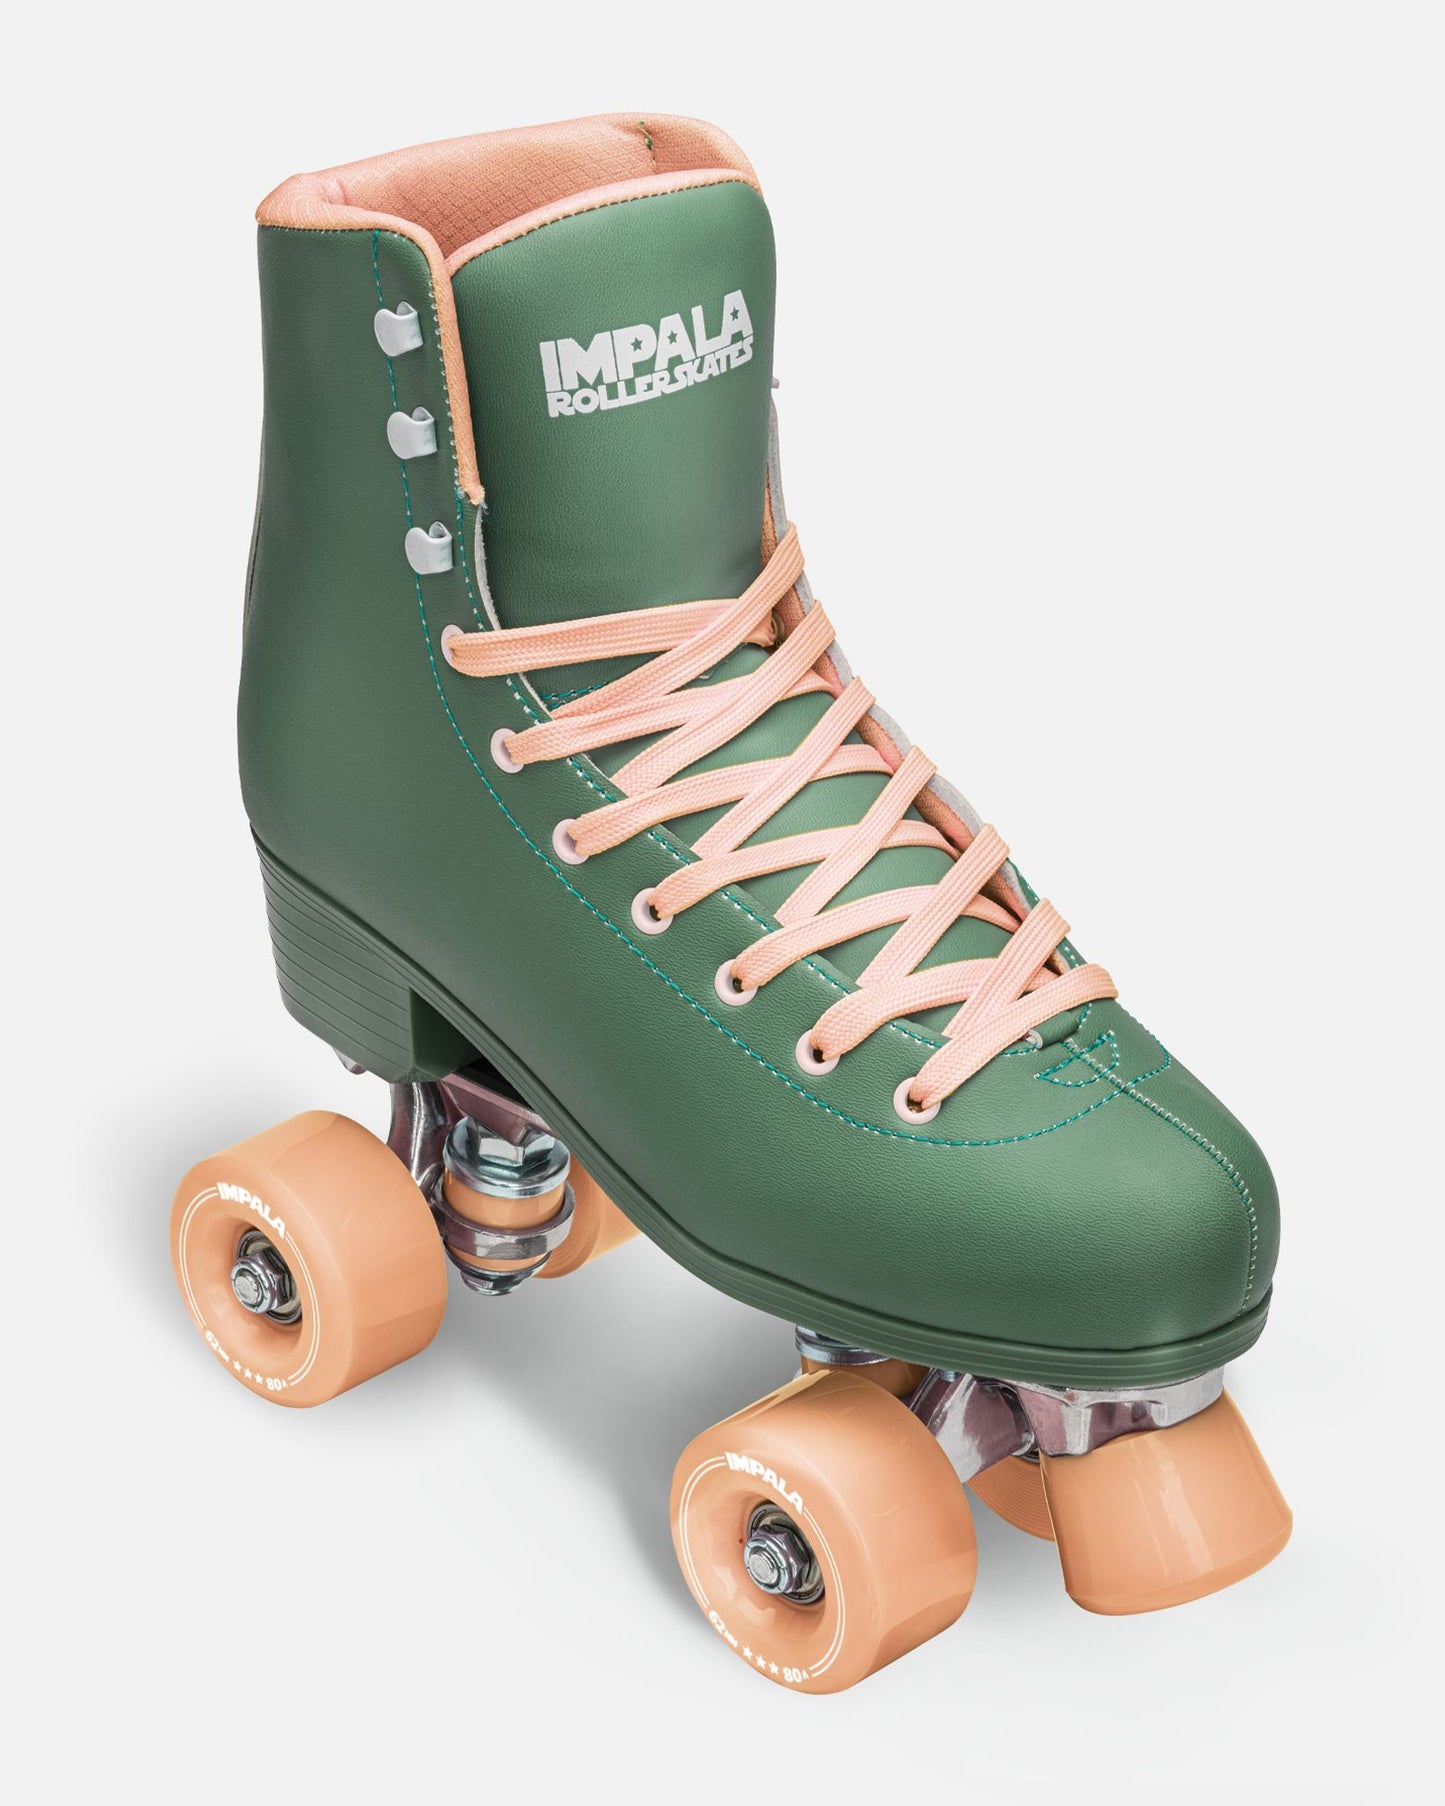 Front angled of Impala Quad Skate - Forest Green